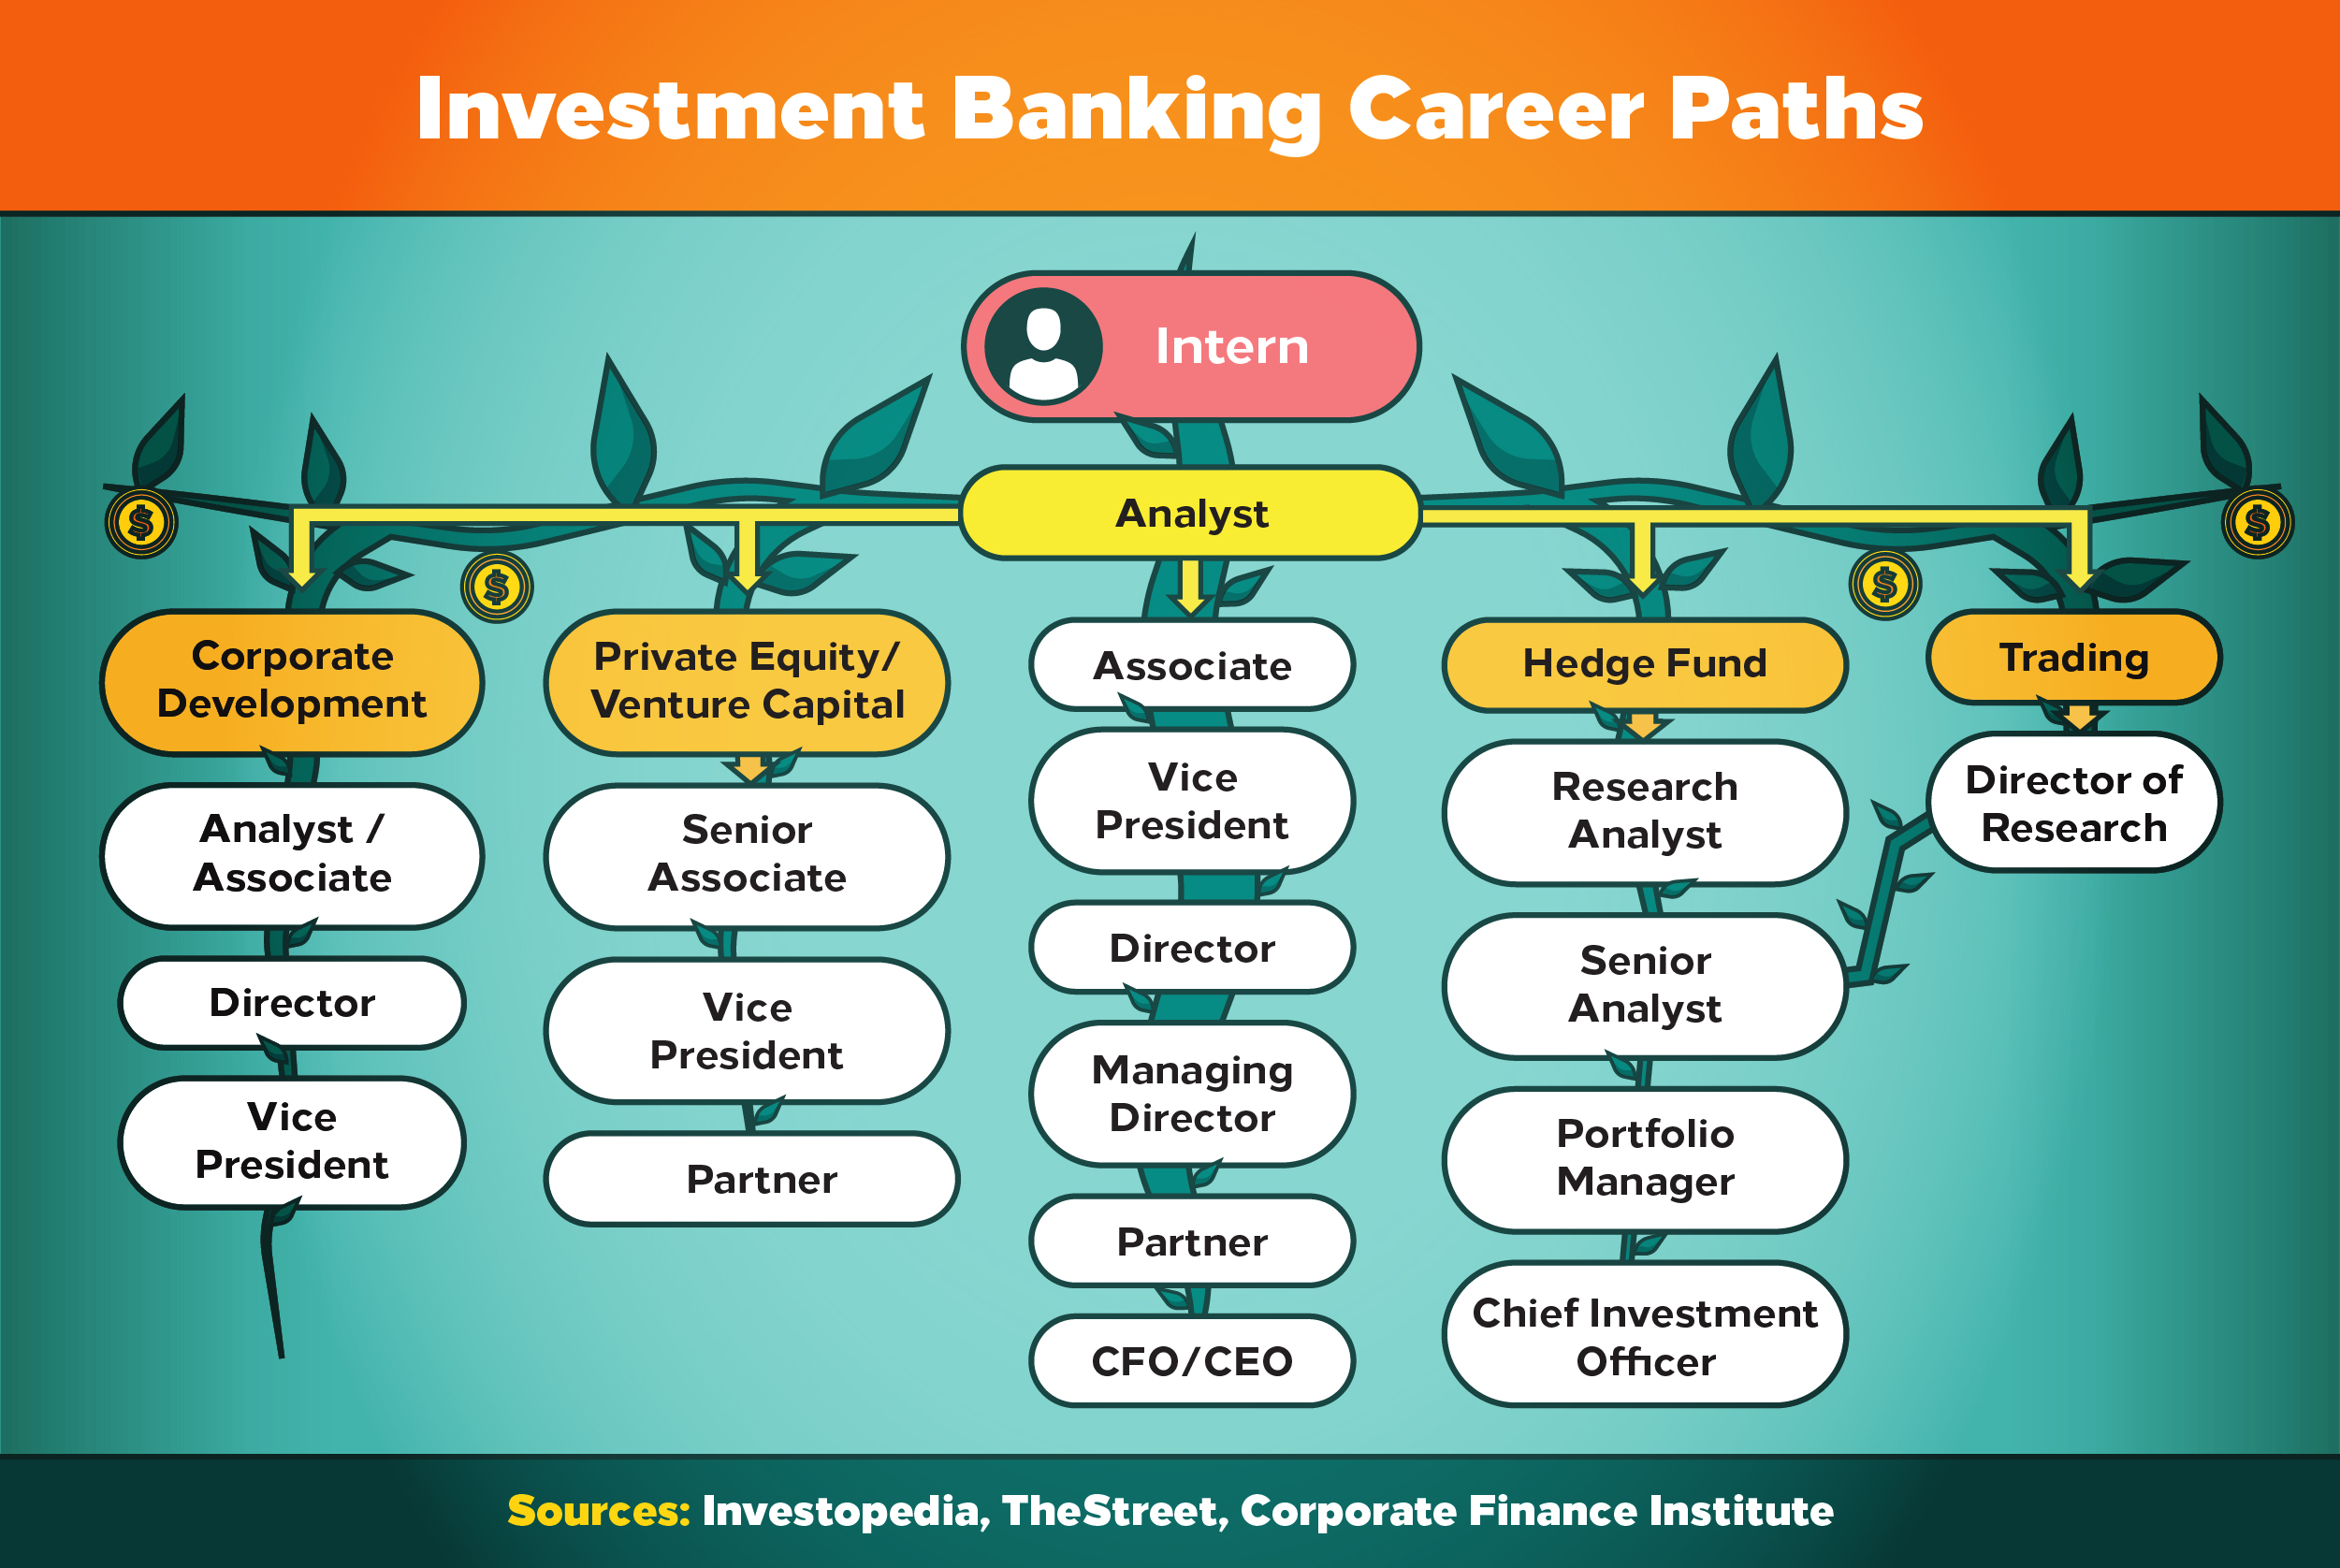 Investment banking career paths include analyst, private equity, hedge fund management, and trading.